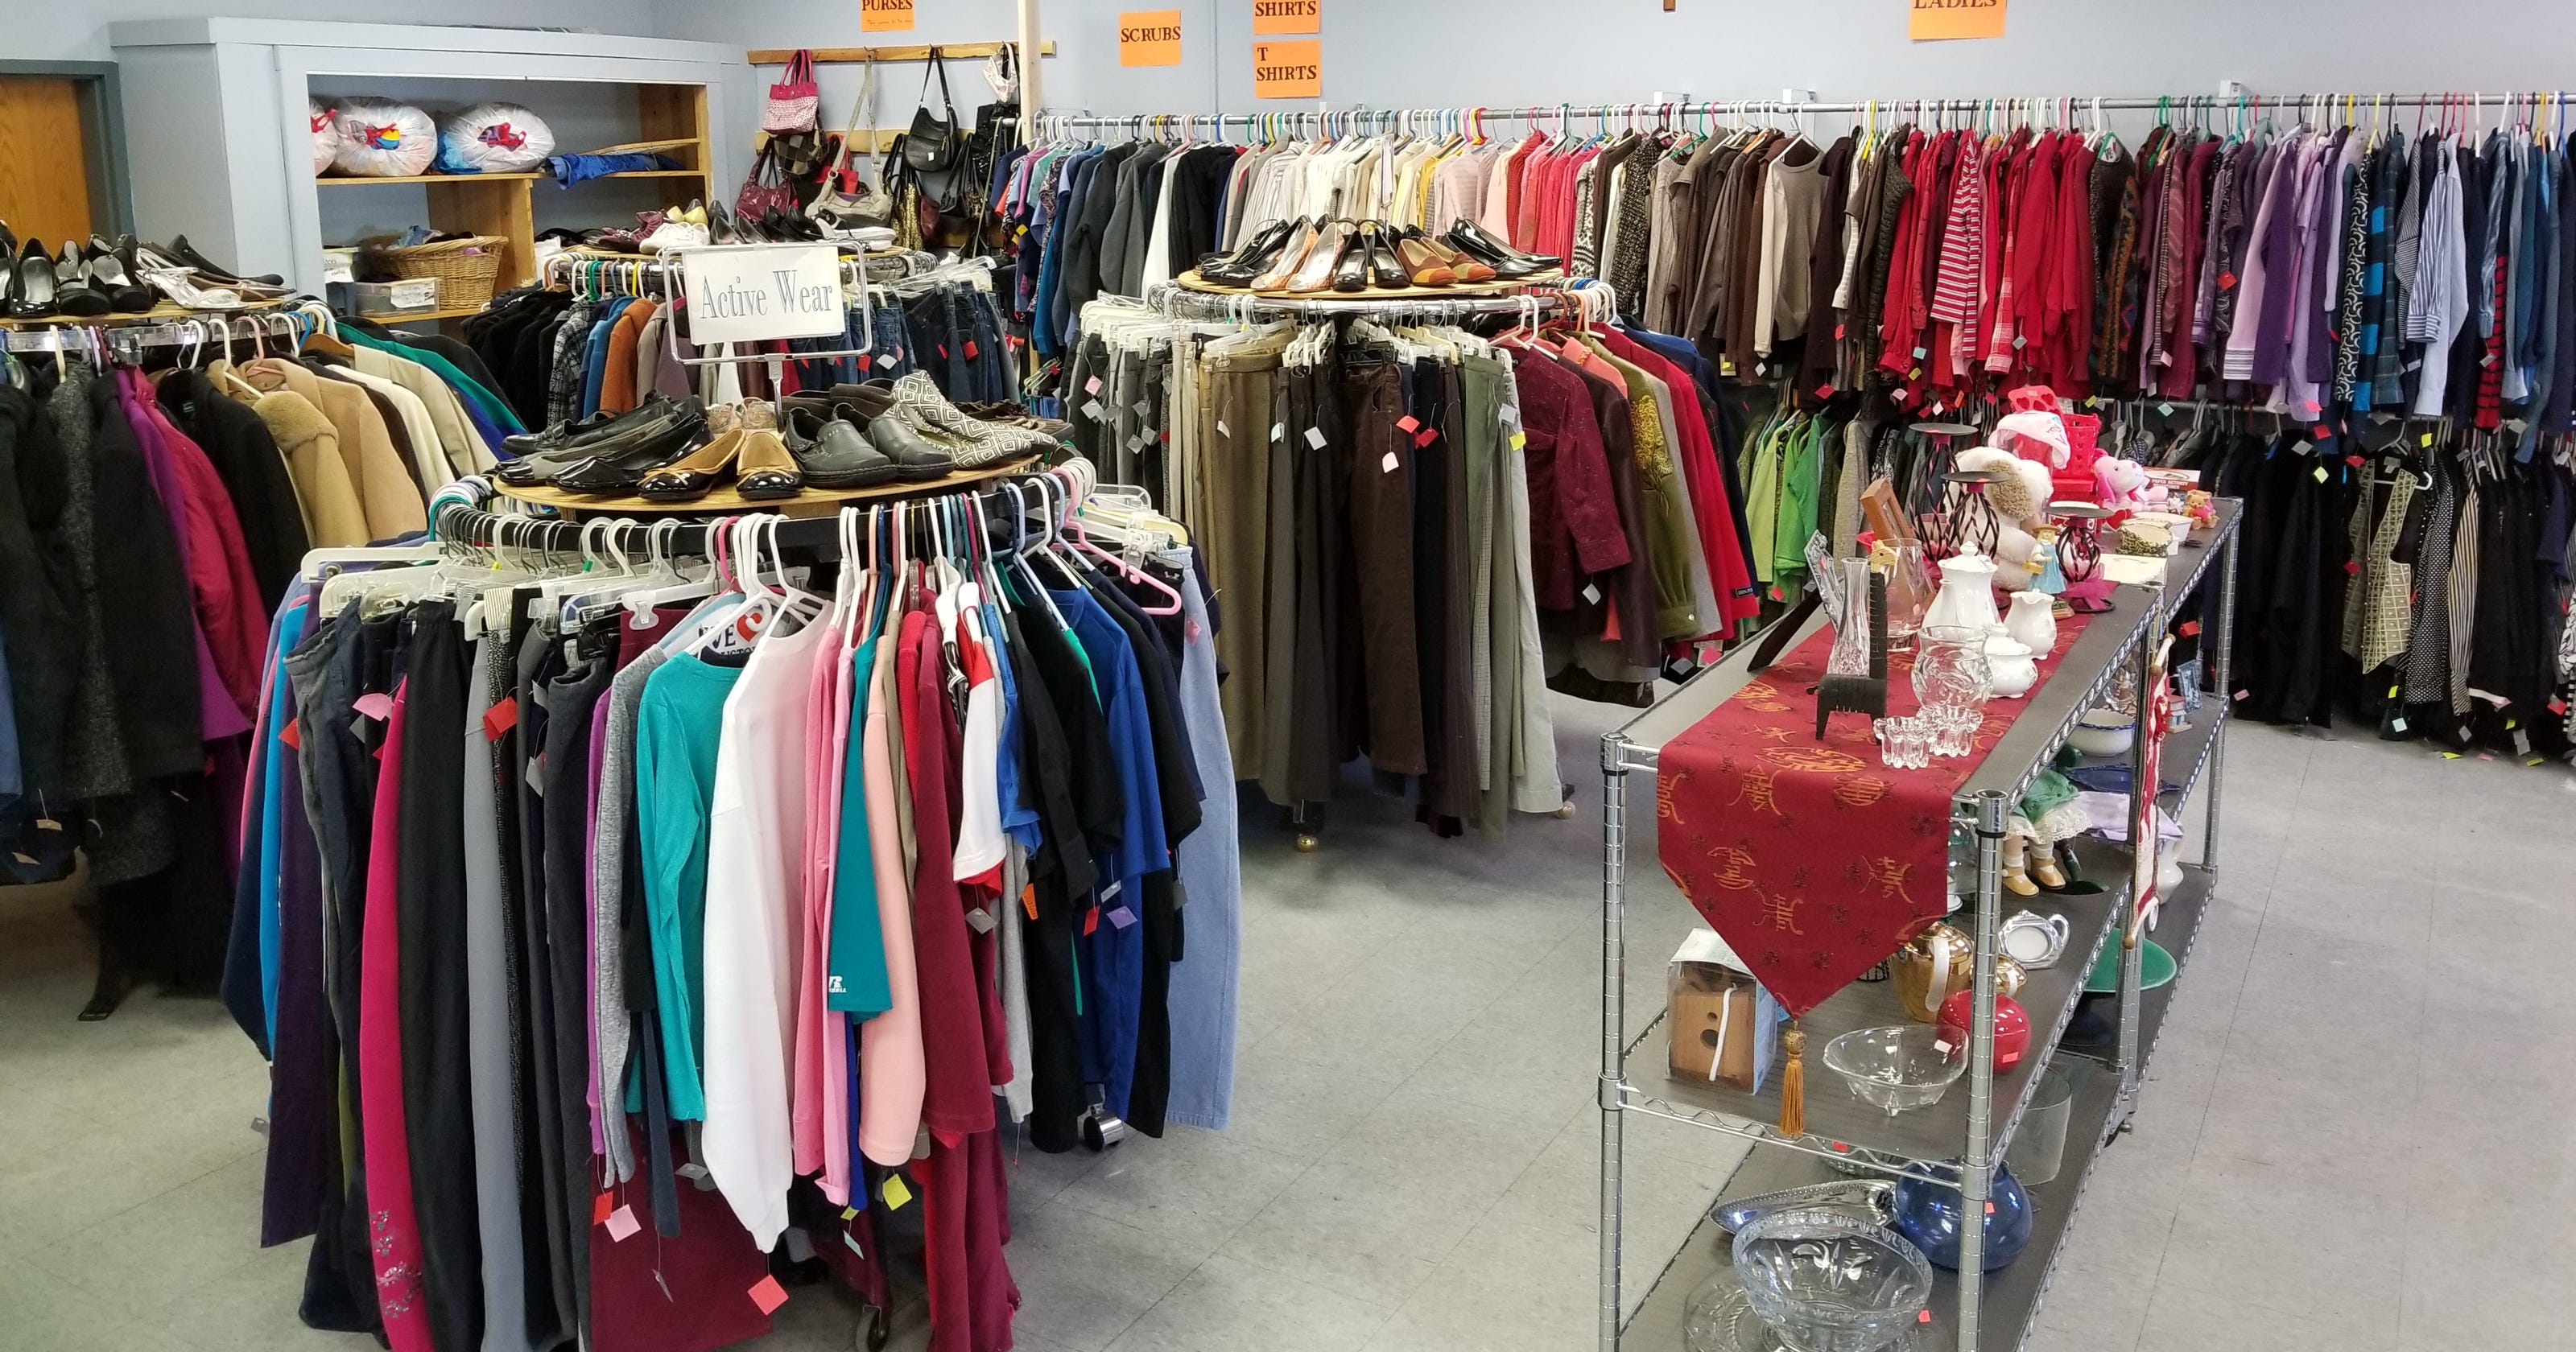 St. Augustine’s Church's thrift store in Highland has new location